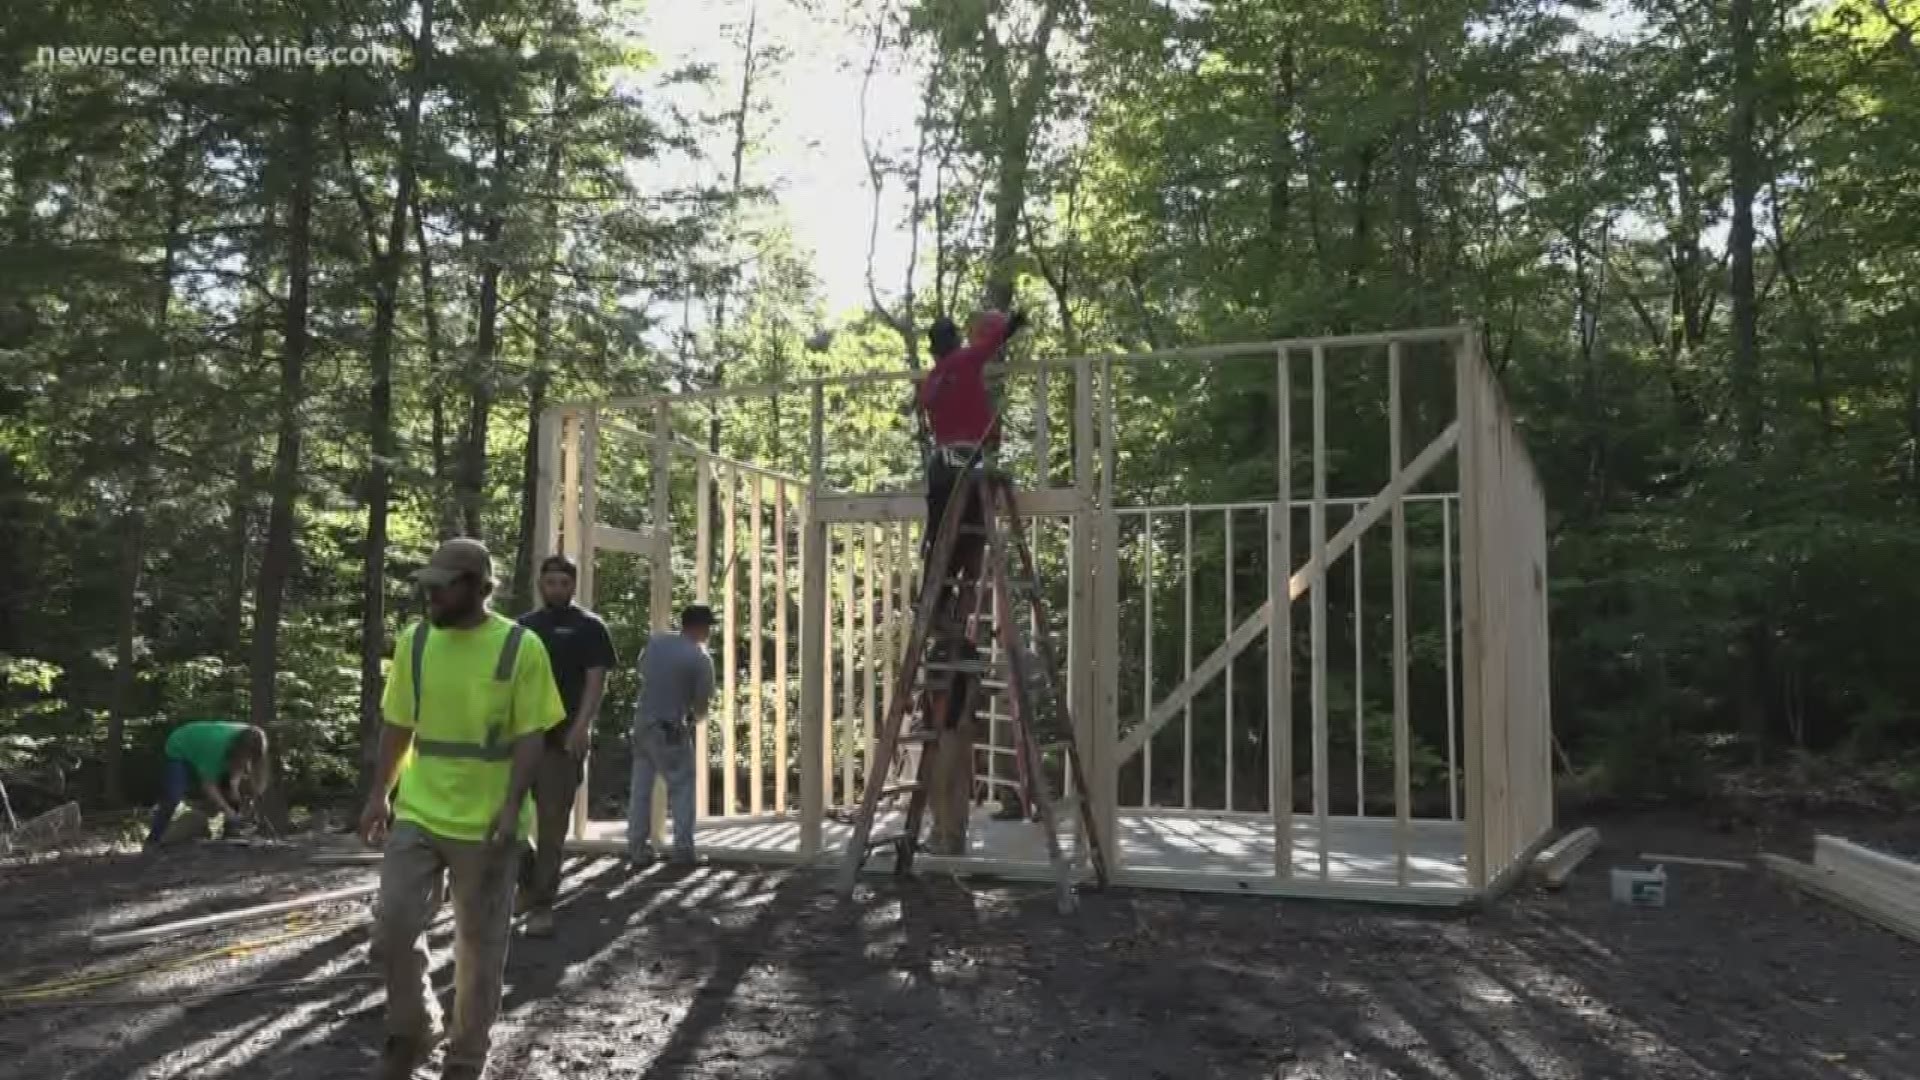 Staff and volunteers for the Pine Tree Camp in Rome are building a barn to connect children and adult campers with animals and gardening.